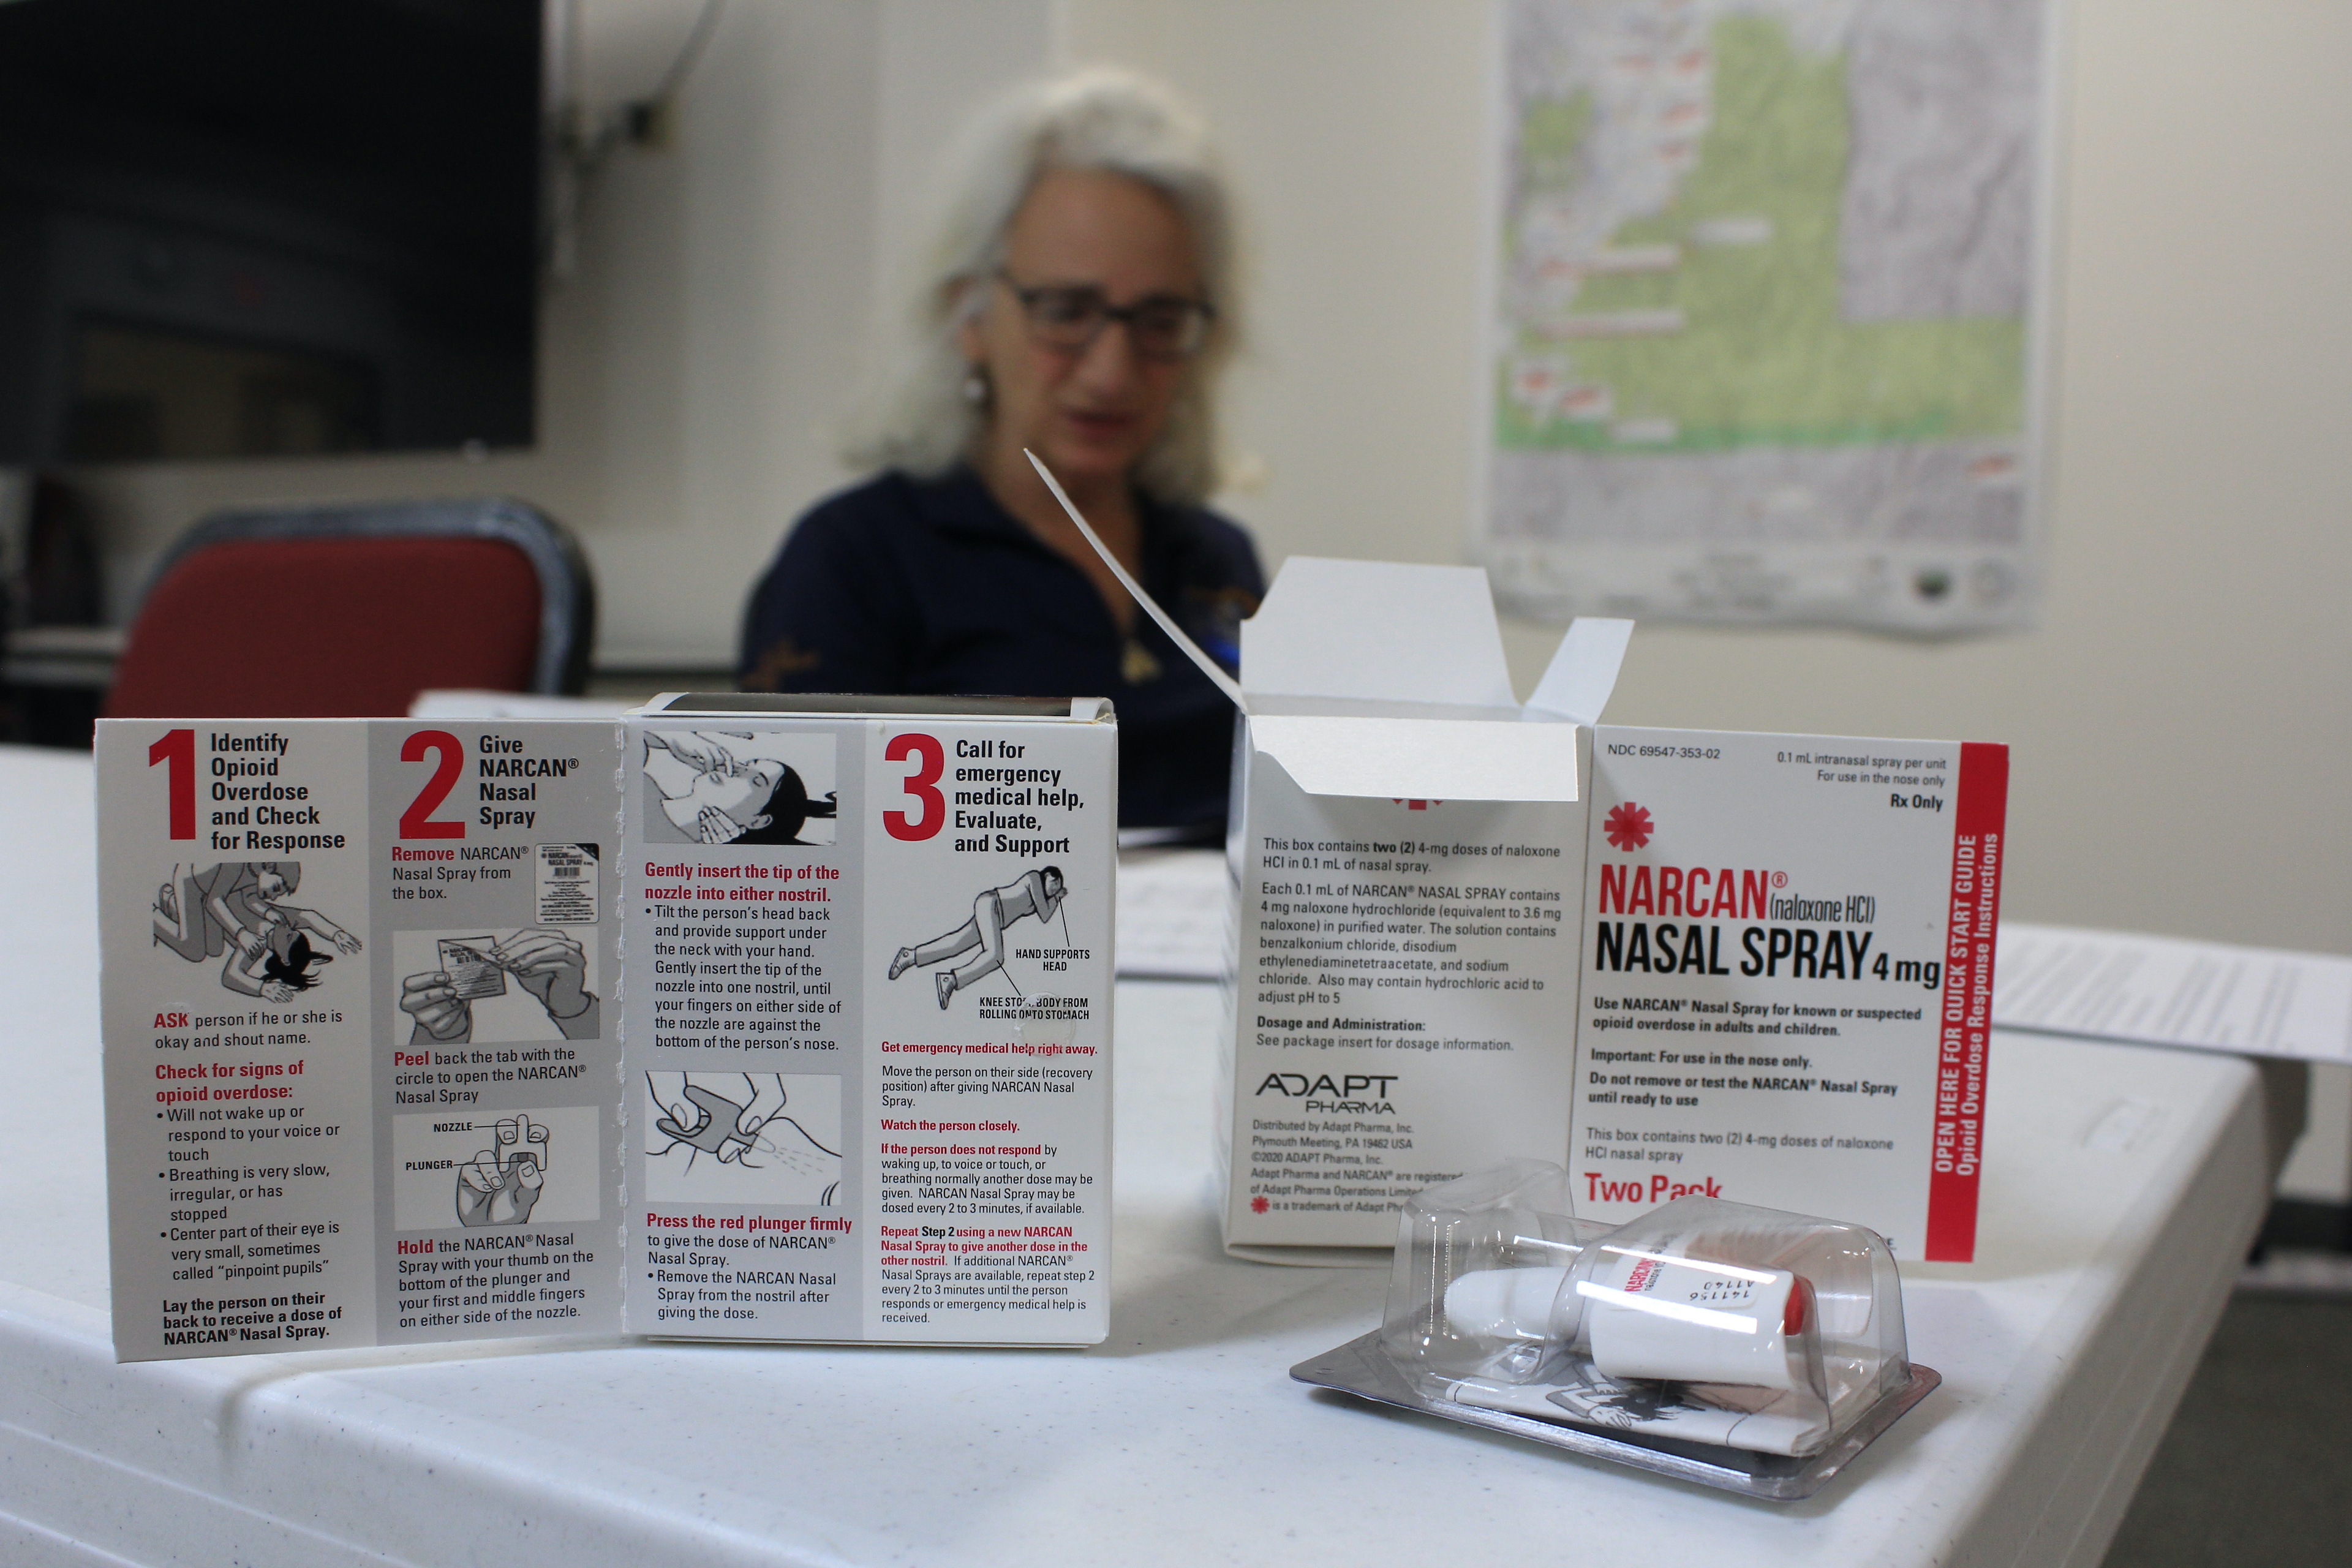 Public Health Agencies Adapt Covid Lessons to Curb Overdoses, STDs, and Gun Violence